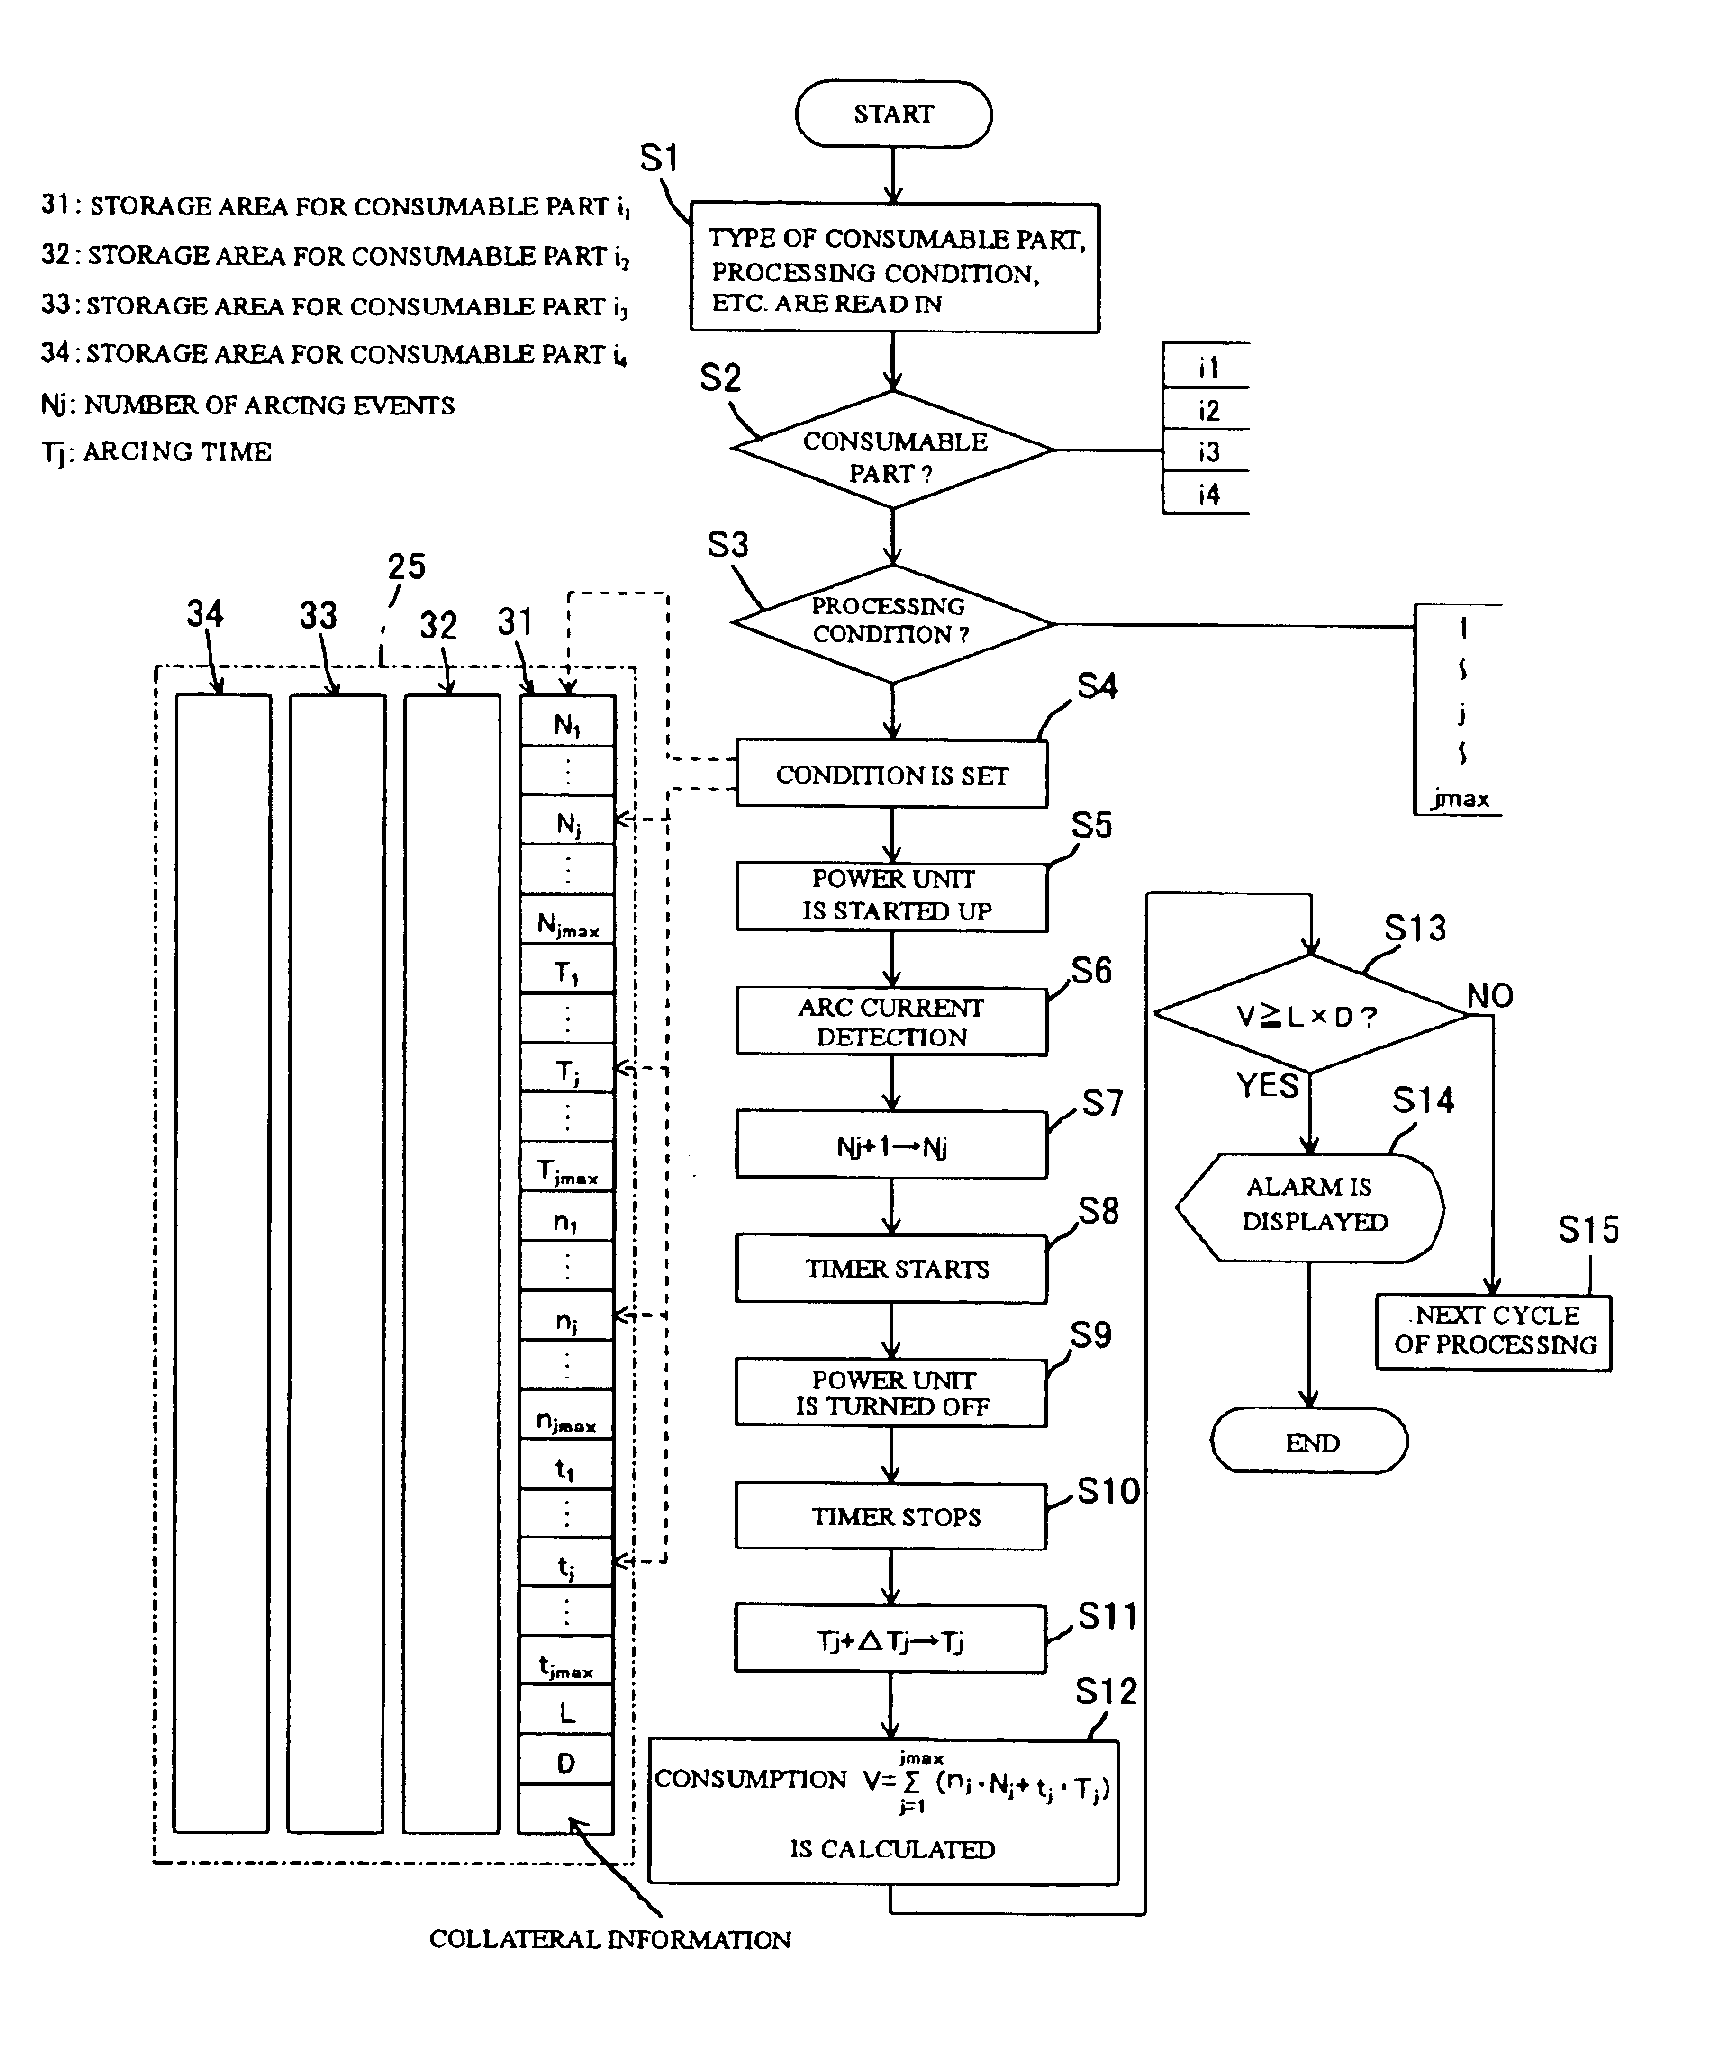 Plasma processing apparatus for monitoring and storing lifetime usage data of a plurality of interchangeable parts